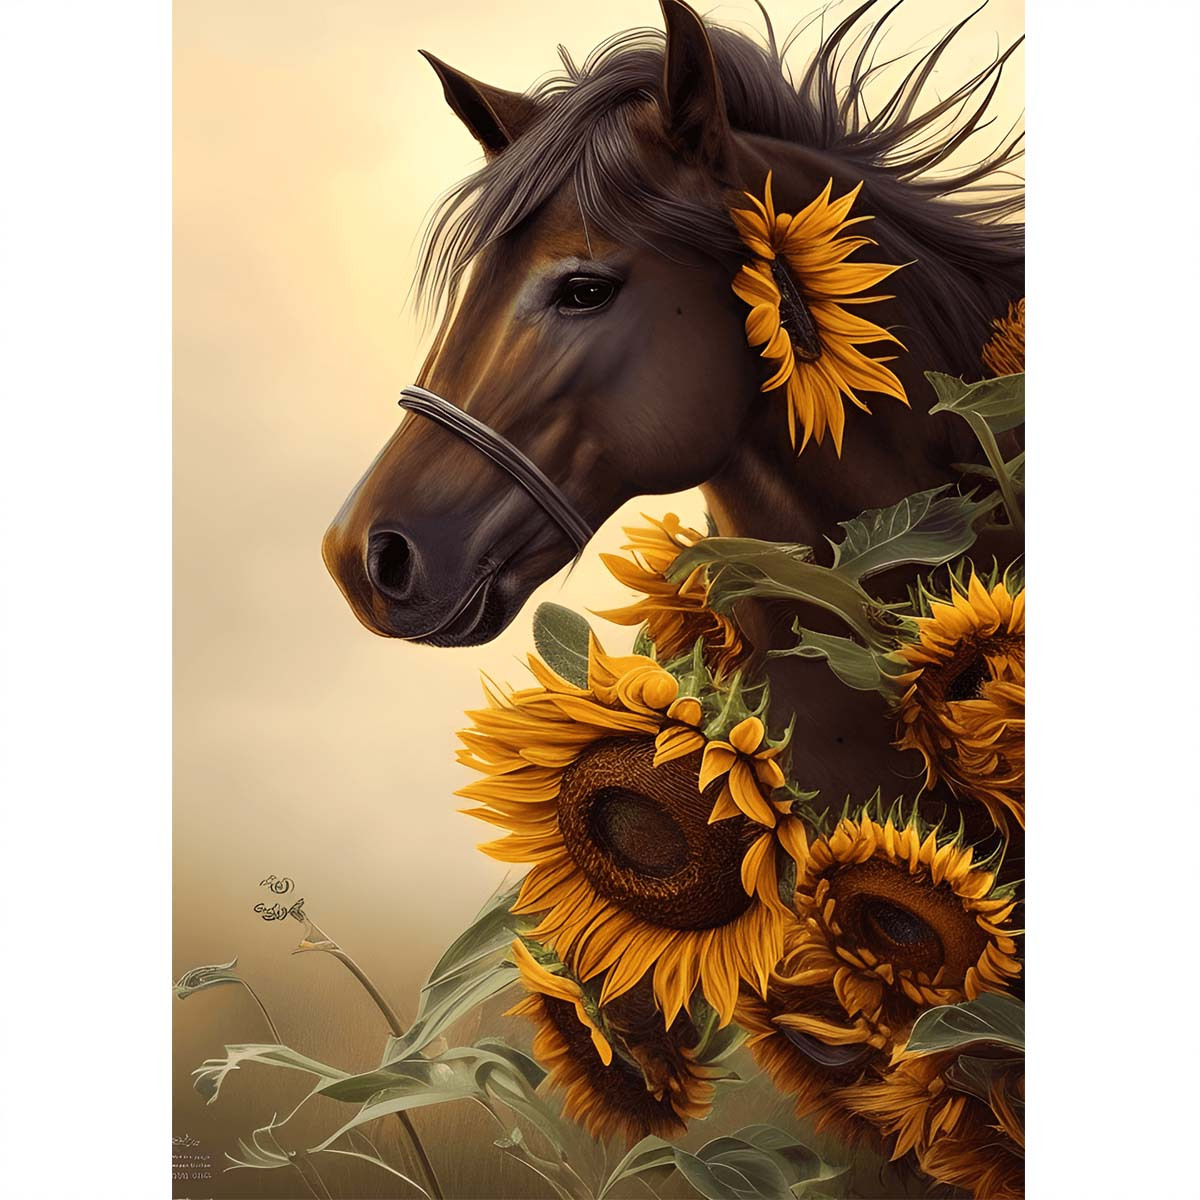 

1pc Sunflower Horse 5d Artificial Diamond Painting Kits Diamond Art For Adults Beginners, 5d Full Drill Round Diamond Painting For Gift Home Wall Decor, 20x30cm/7.9x11.8inch, Frameless